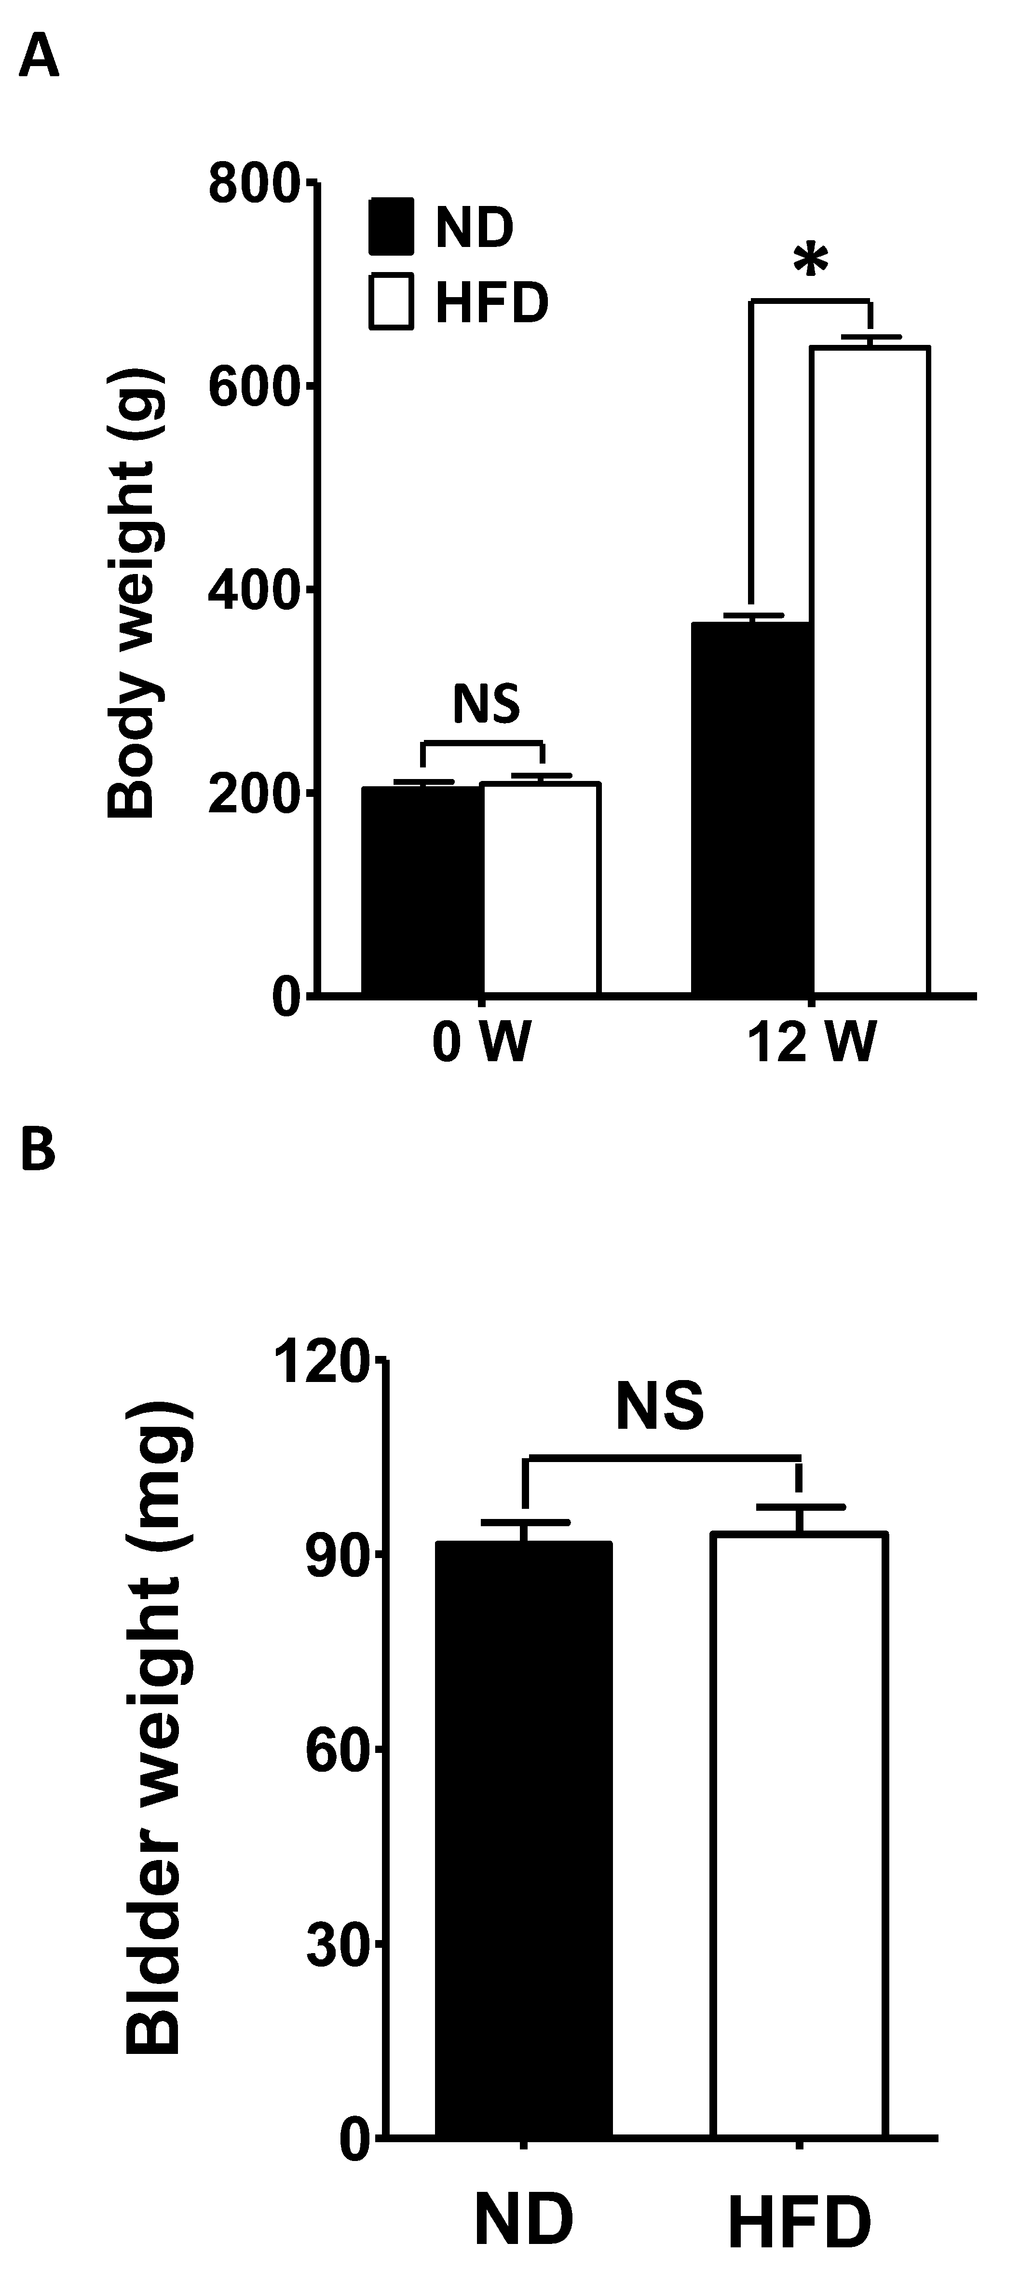 Changes in bodyweight. (A) The bodyweights before and after 12 weeks of feeding were compared between HFD rats and ND rats. (B) The bladder weights were compared between ND and HFD rats after 12 weeks of feeding. Data are expressed as the mean ± SEM, N = 40 per group, * P NS: not significant.